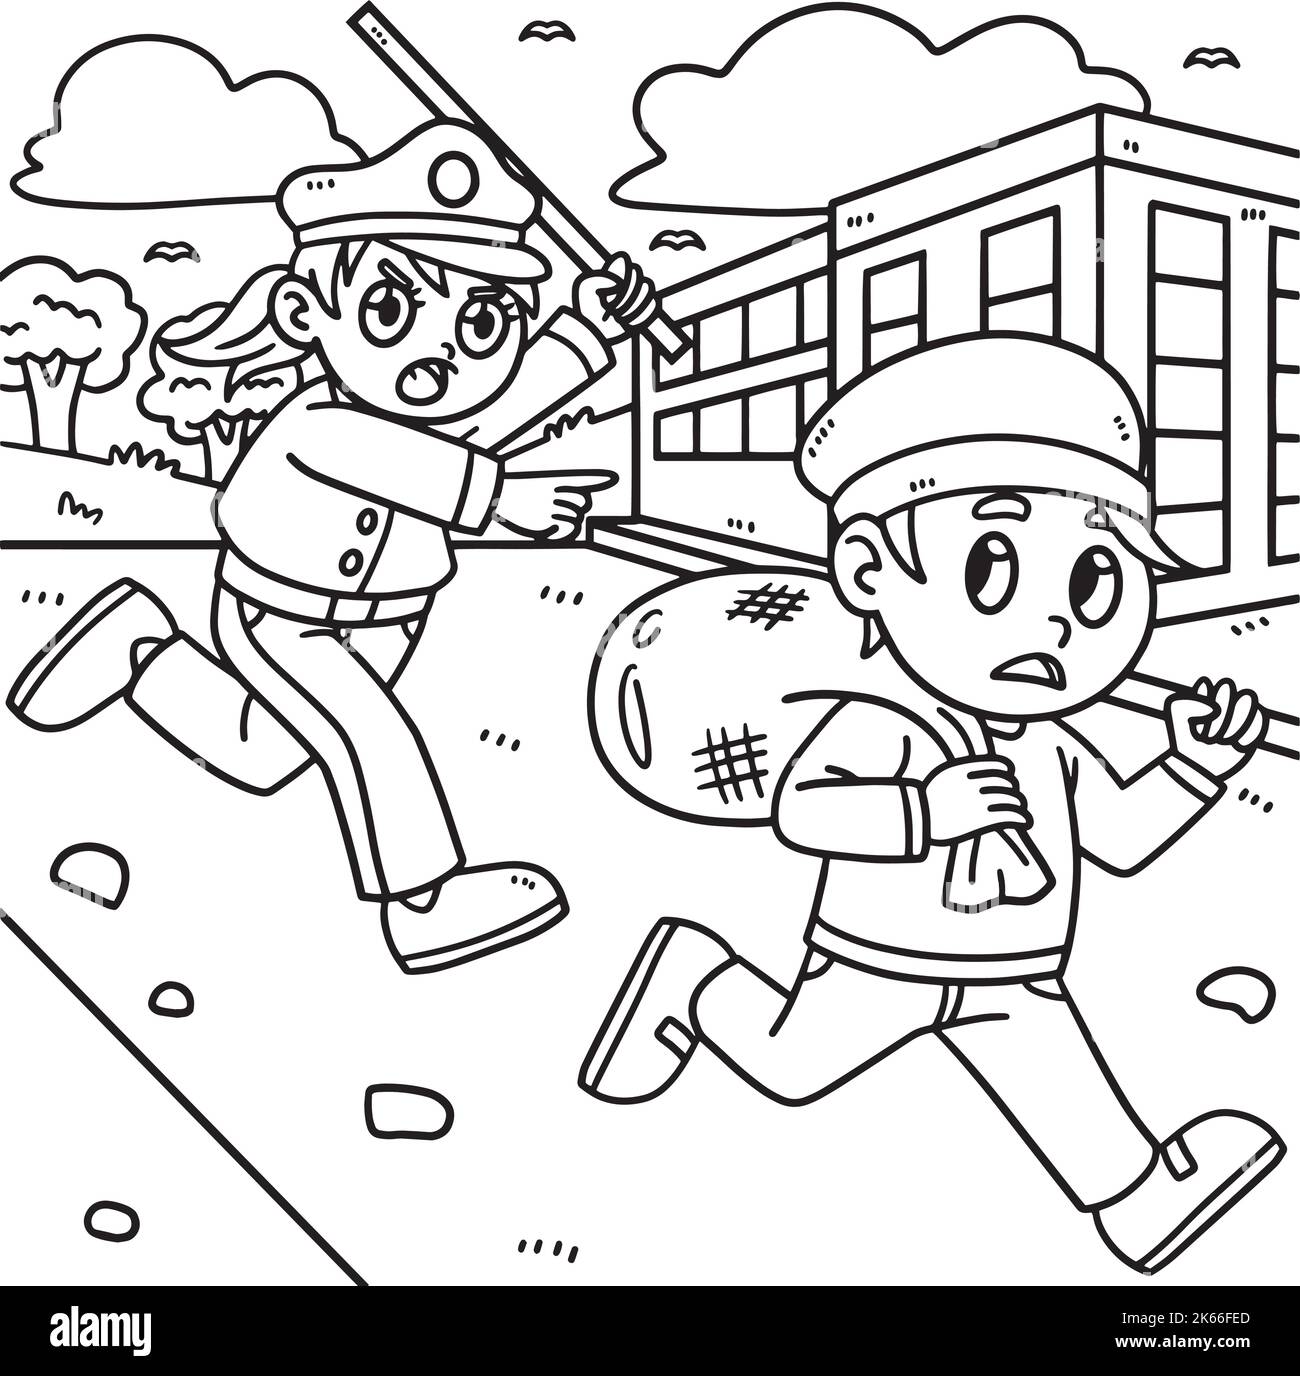 Policewoman Chasing Thief Coloring Page  Stock Vector